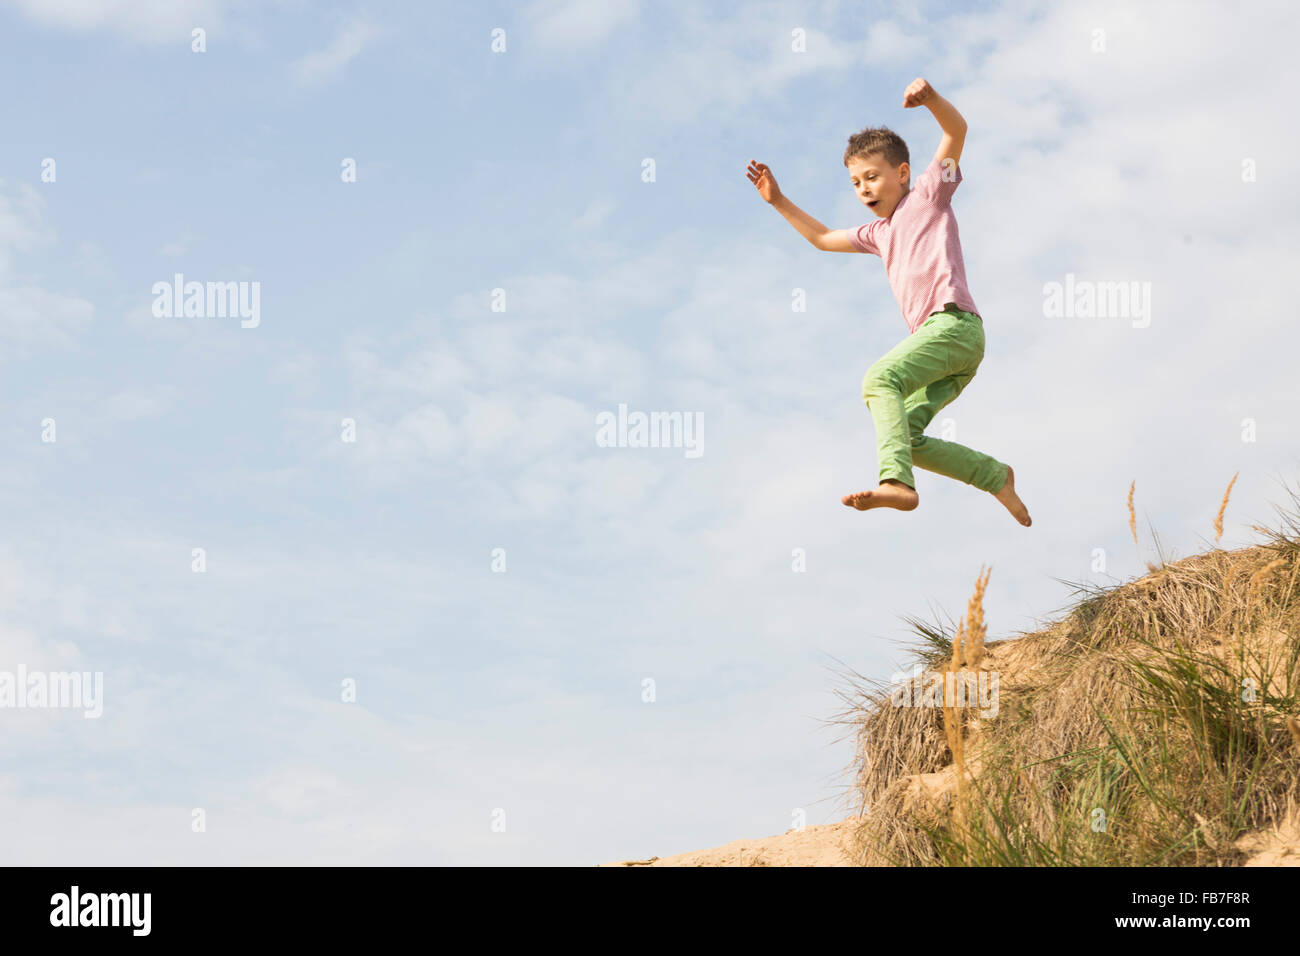 Low angle view of boy jumping against sky Banque D'Images